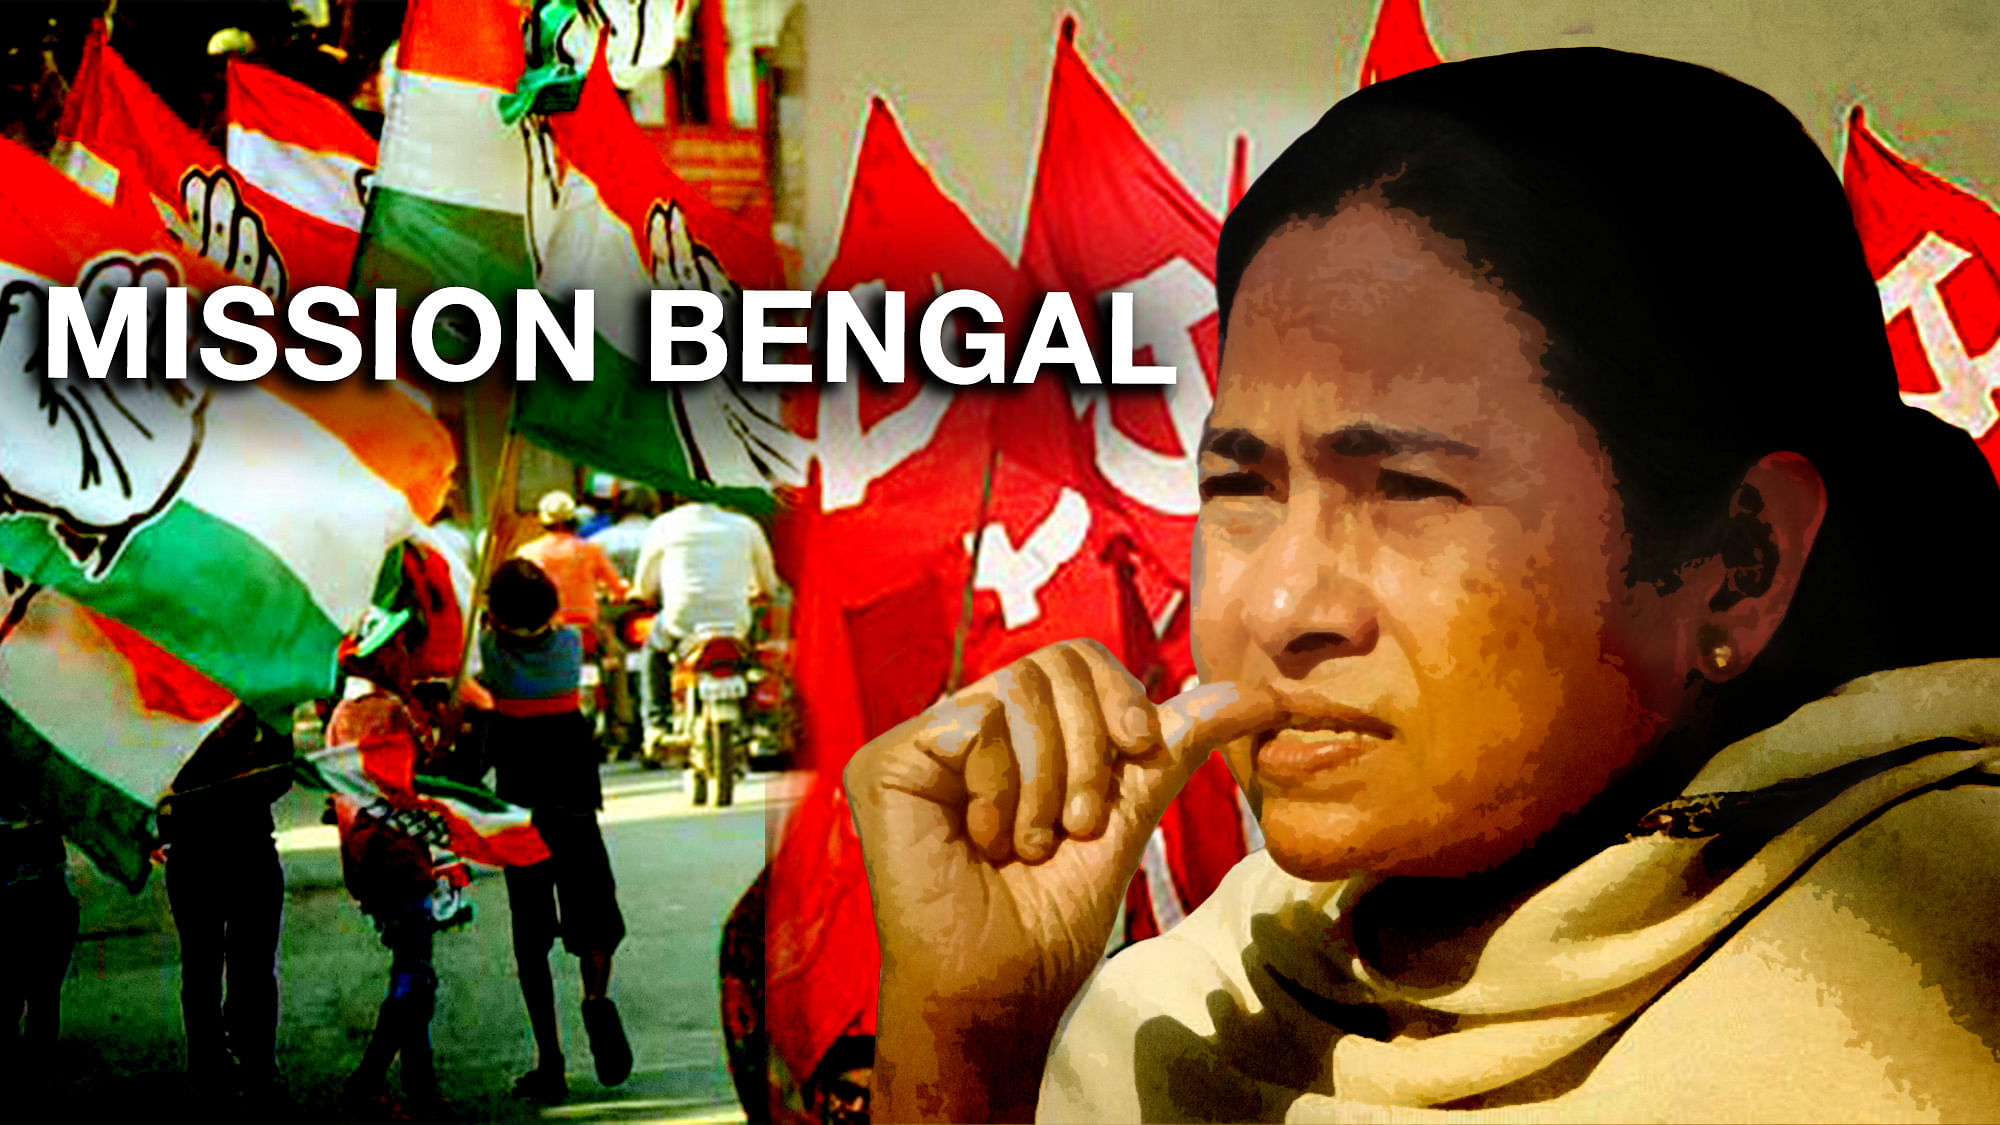 If Congress and CPI(M) tie up, it will surely spell trouble for Mamata Banerjee and her party. (Photo: The Quint)